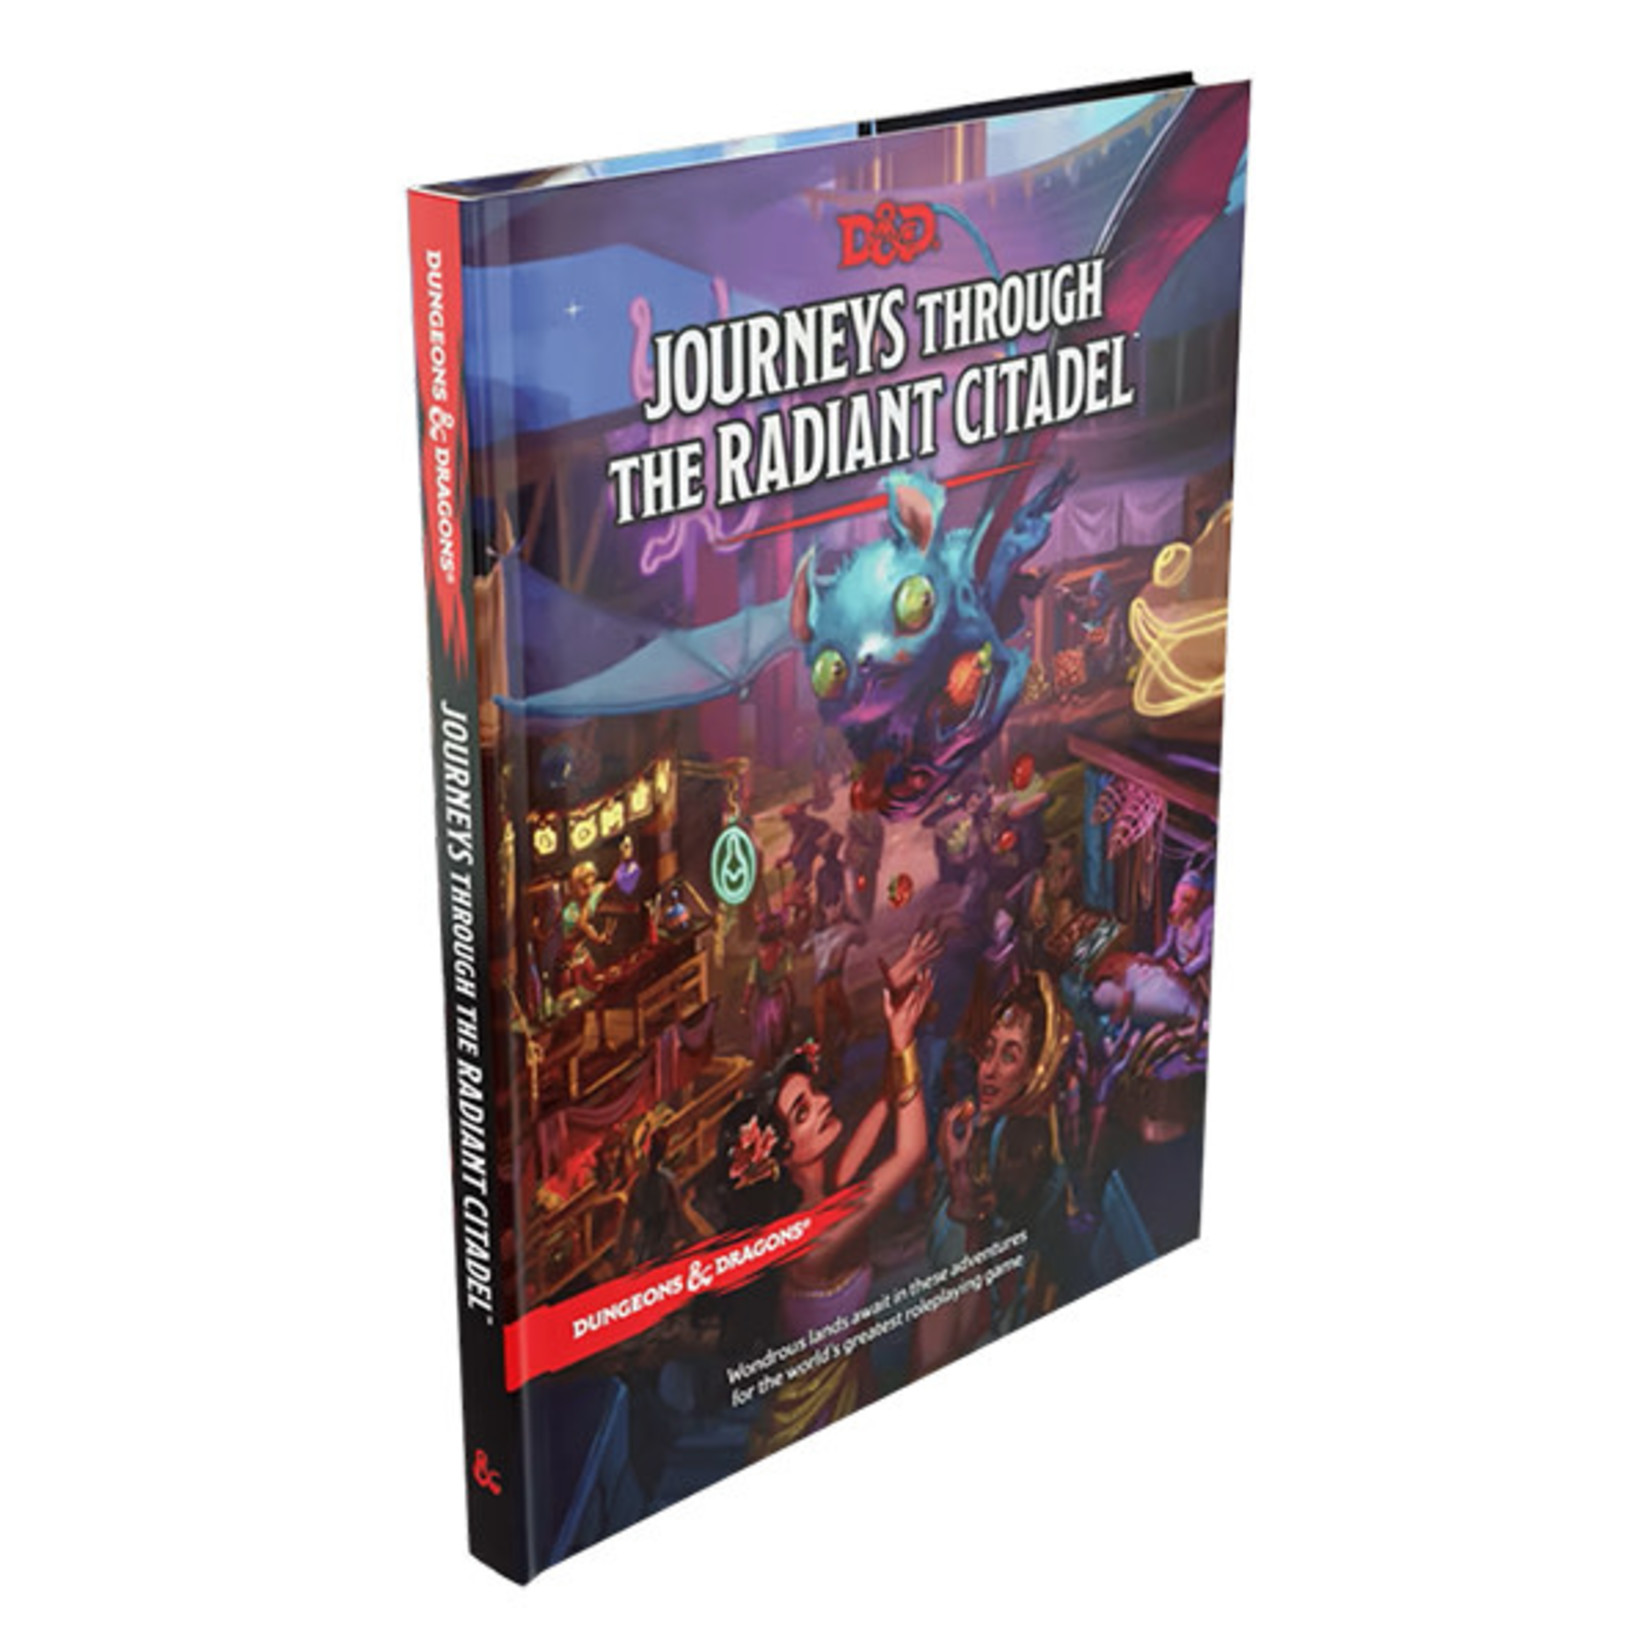 Dungeons & Dragons Dungeons & Dragons – Journeys Through the Radiant Citadel (5e, Regular Cover)